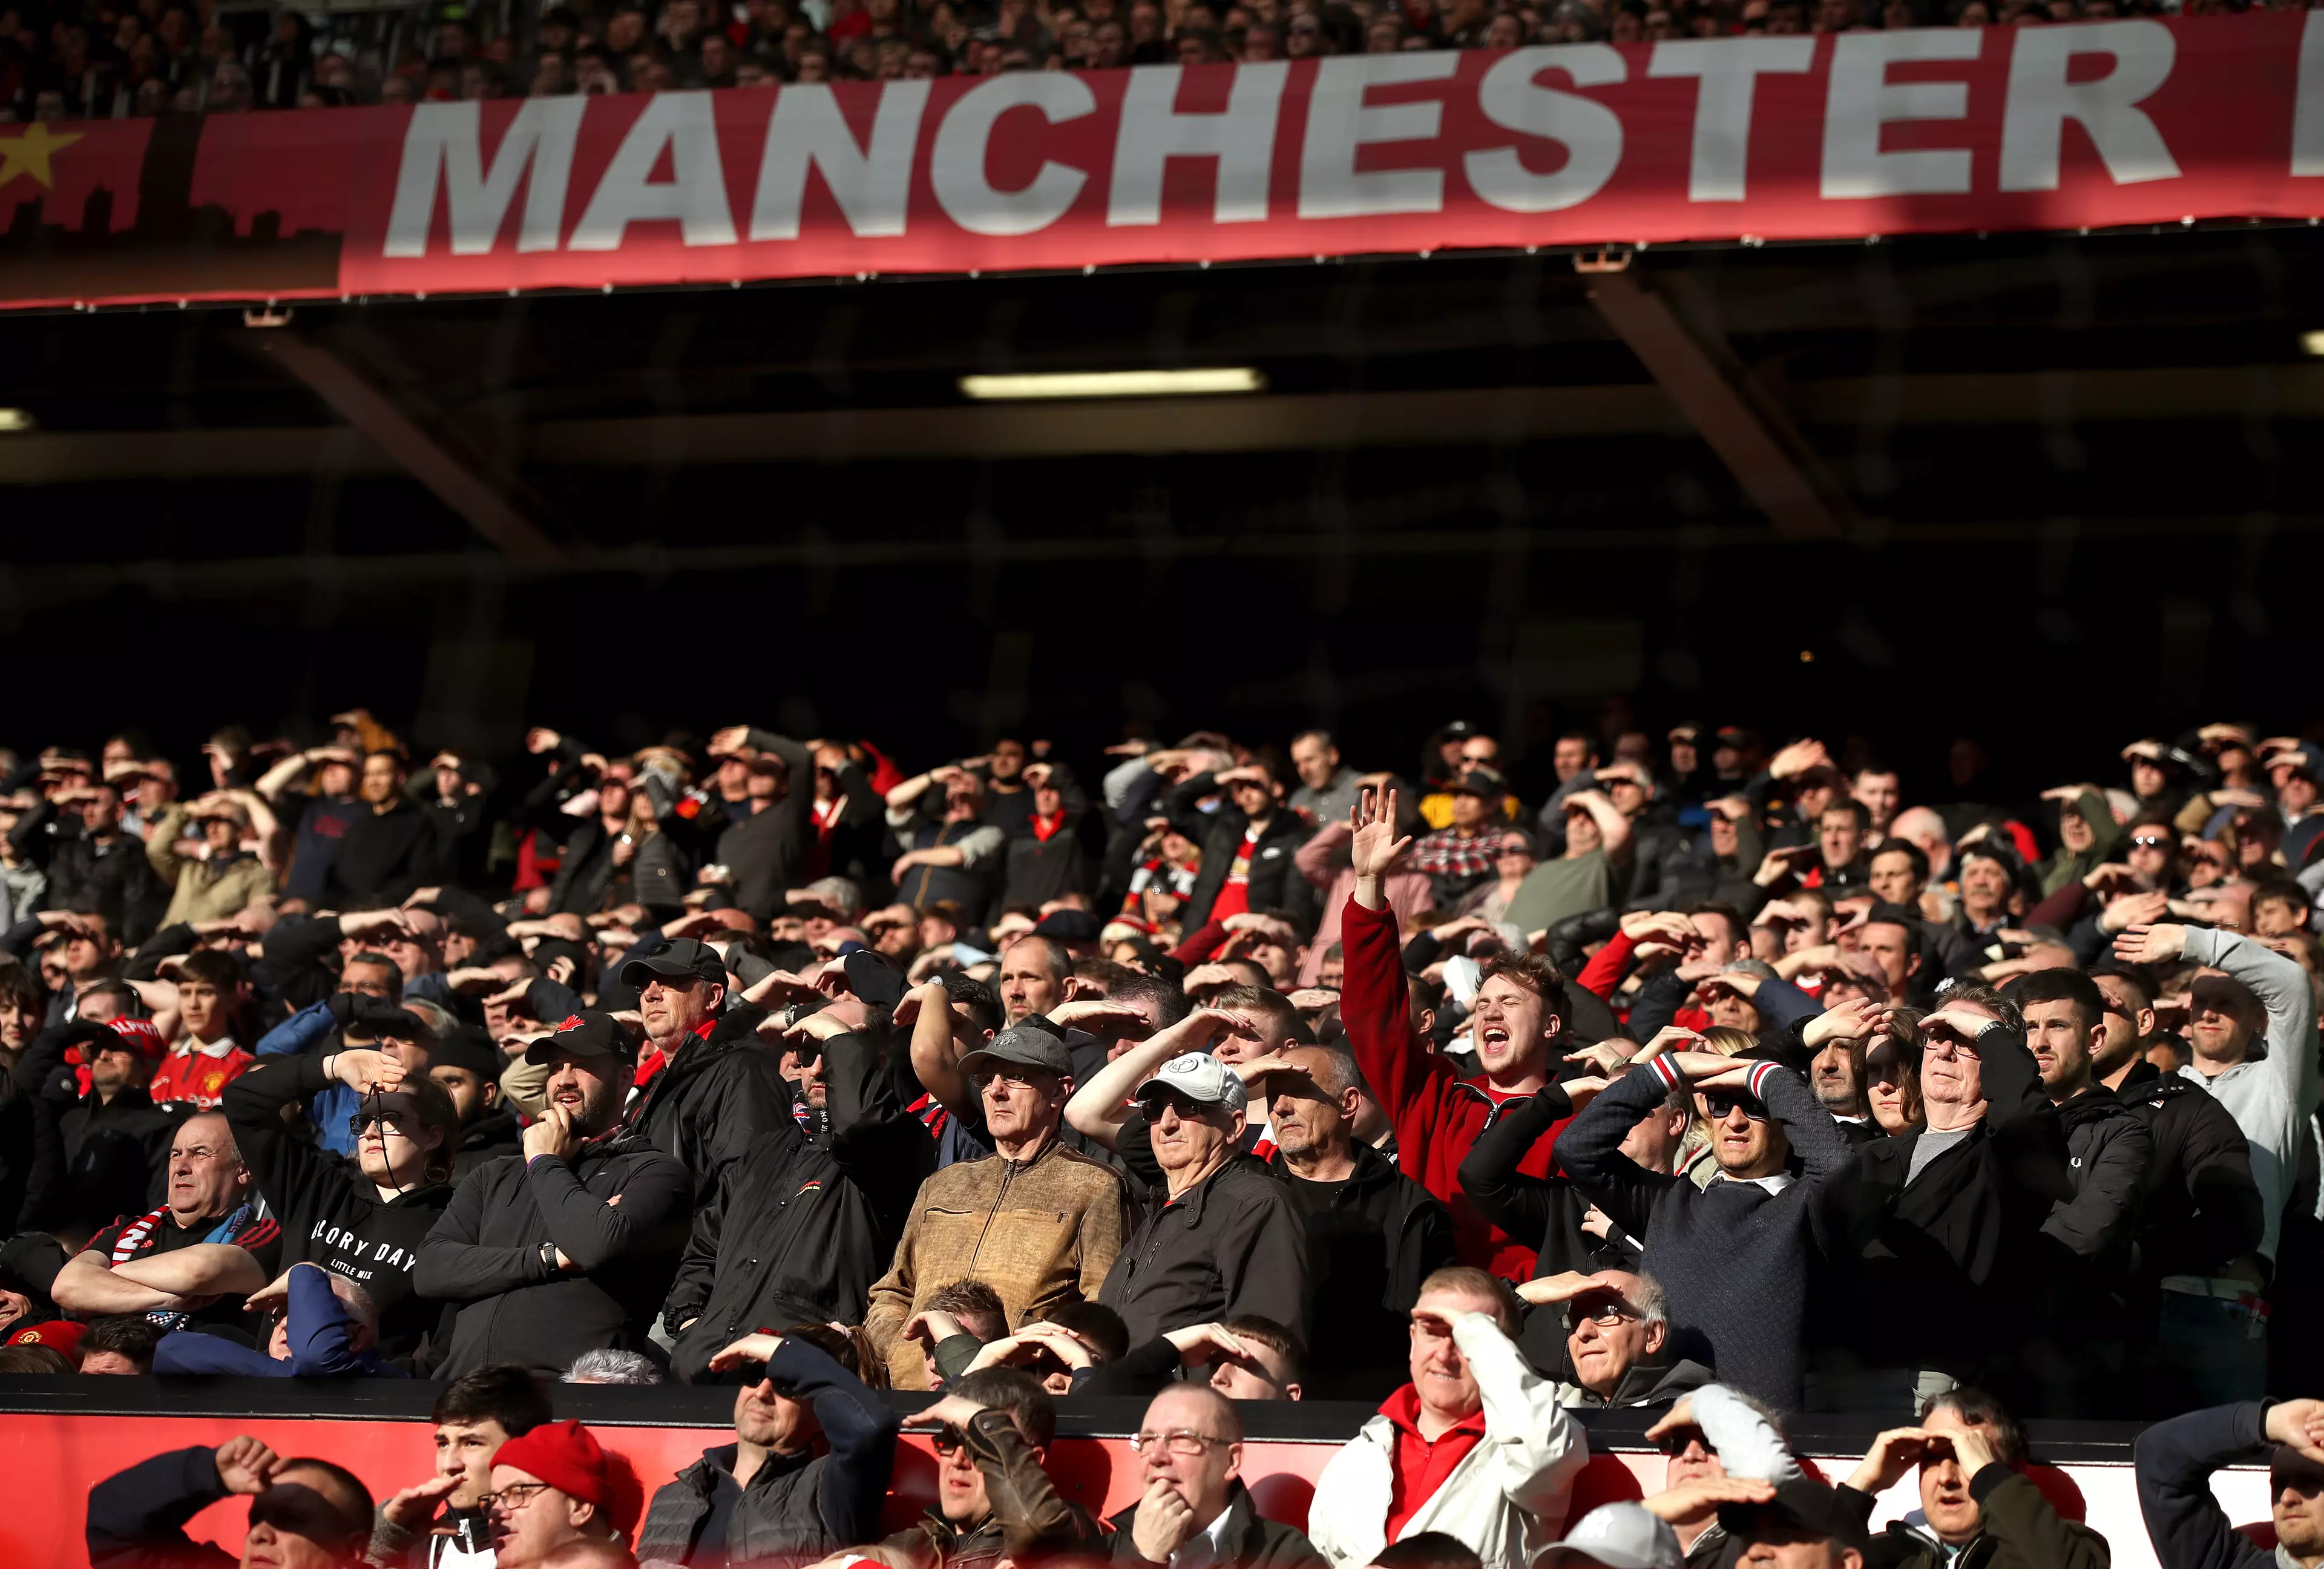 United supporters at Old Trafford. (Image